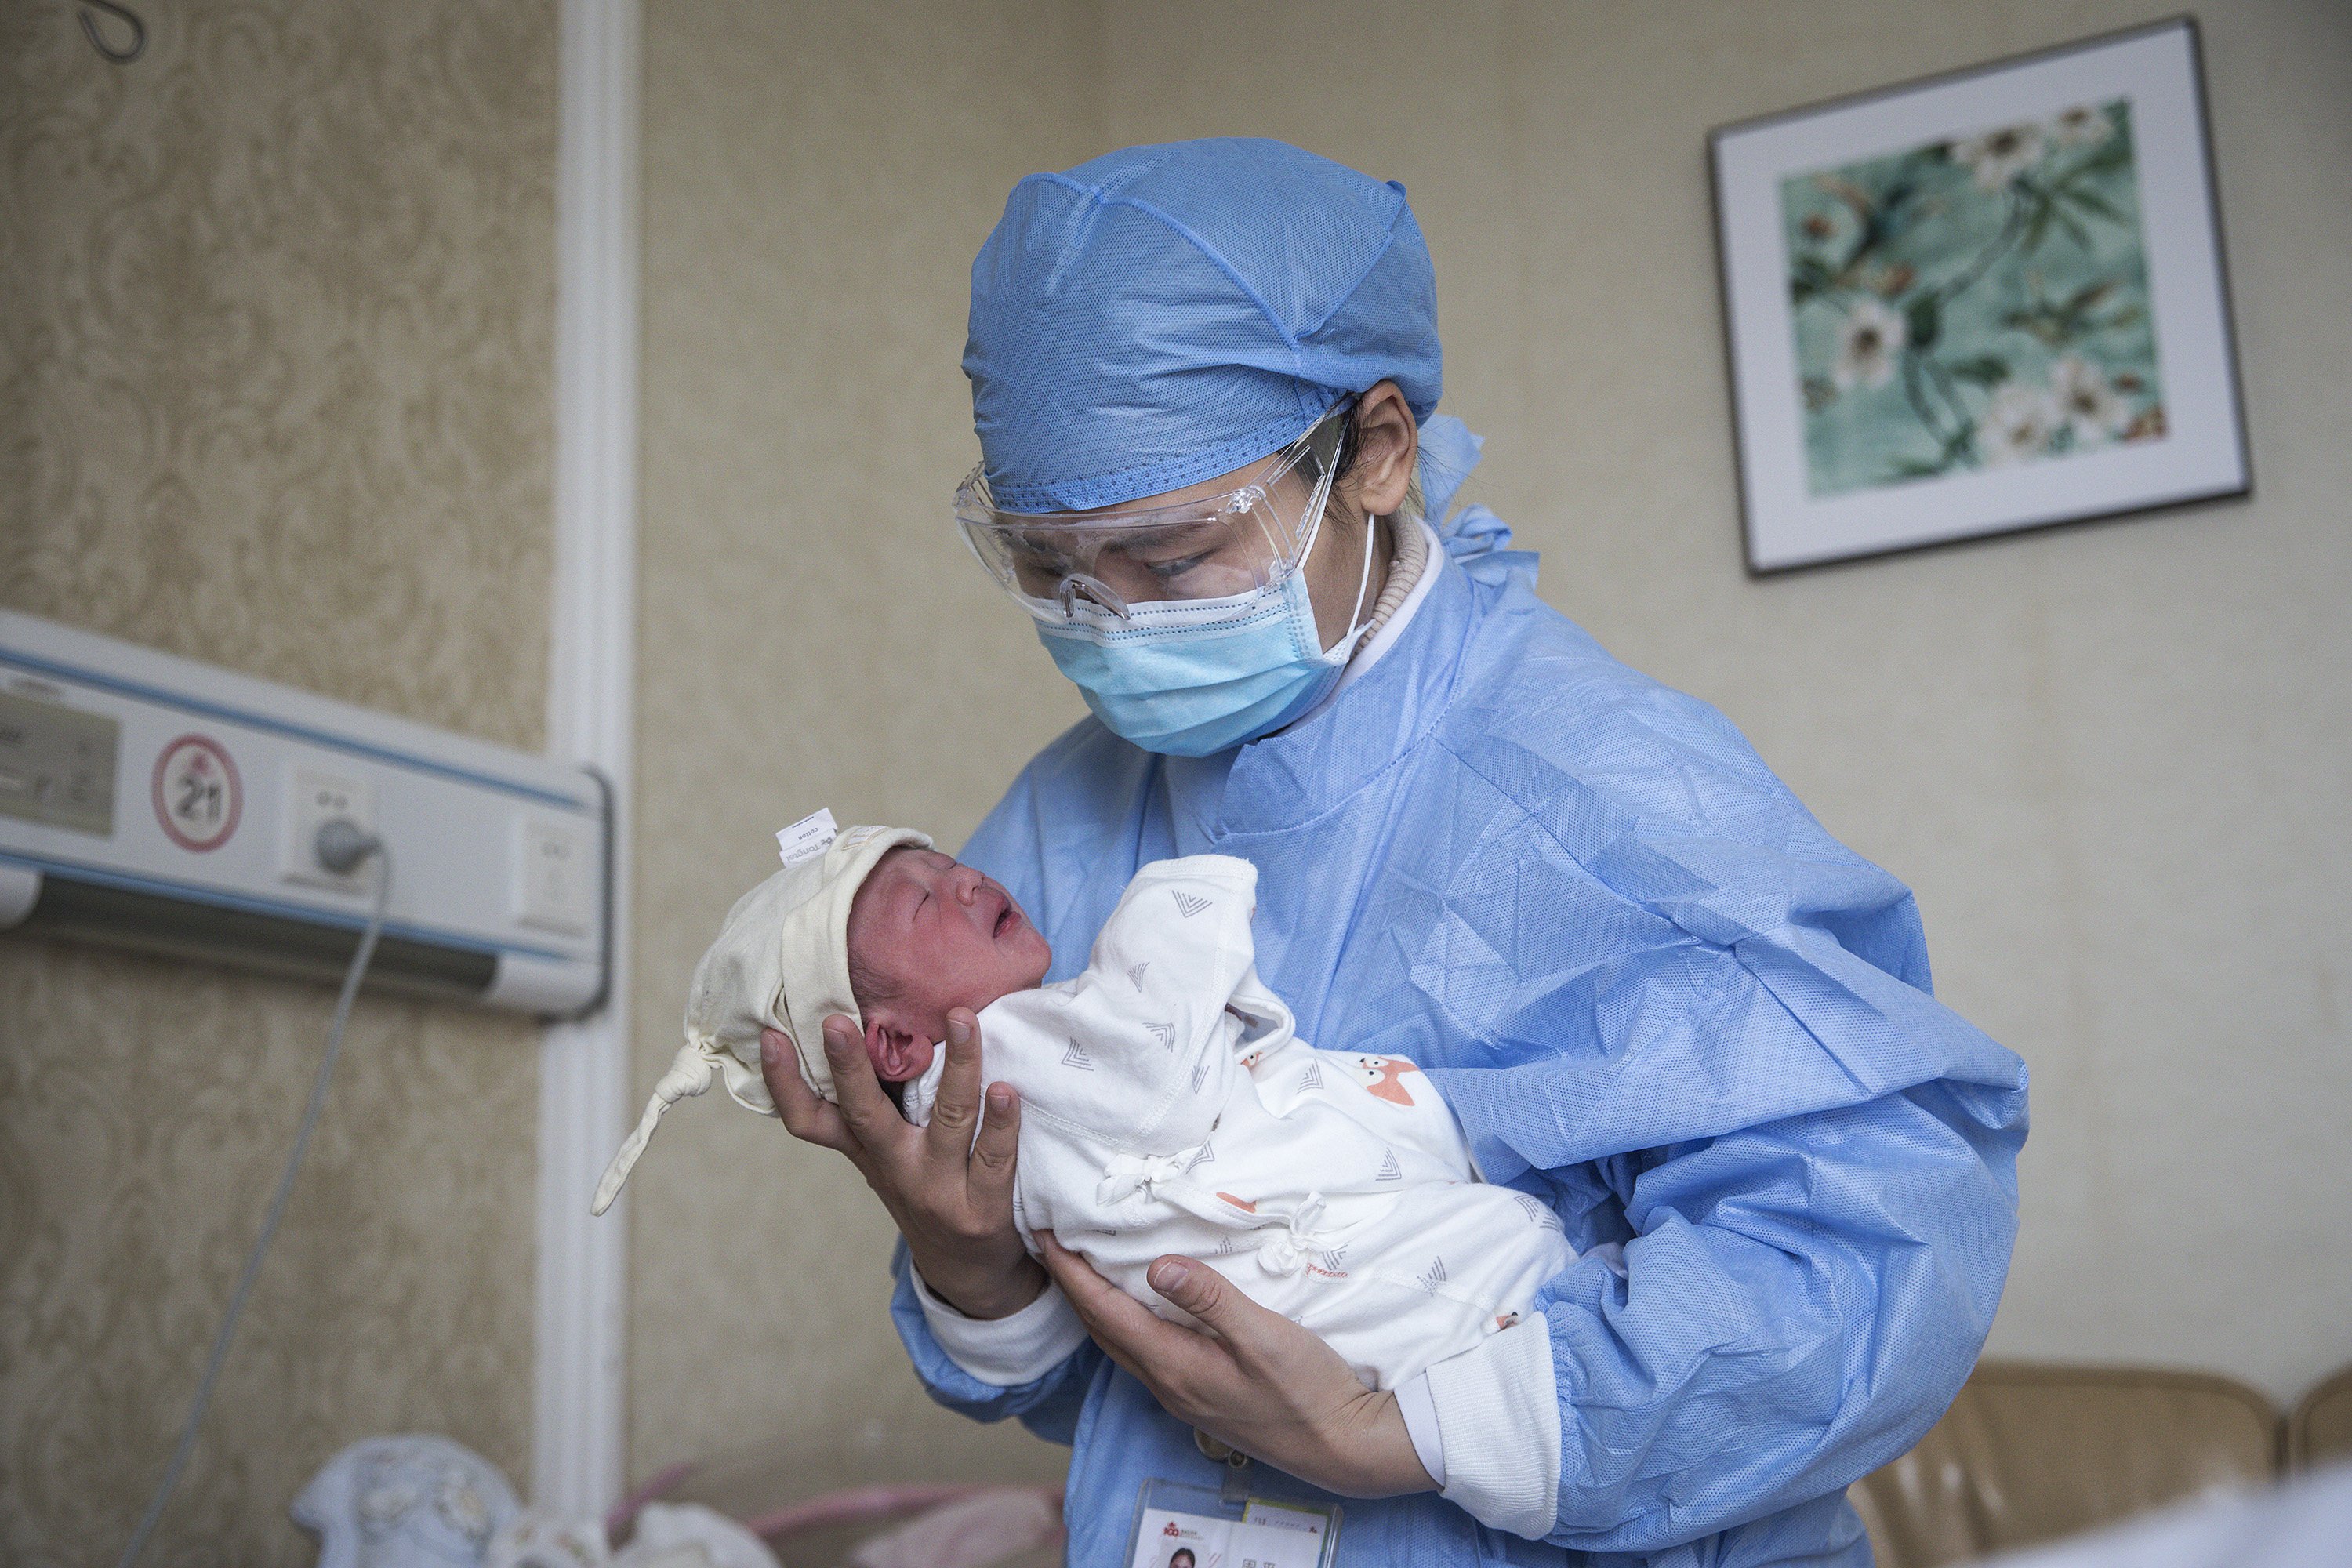 A prominent economist has presented a controversial solution to China’s low birth rate and rapidly ageing population. Photo: Getty Images